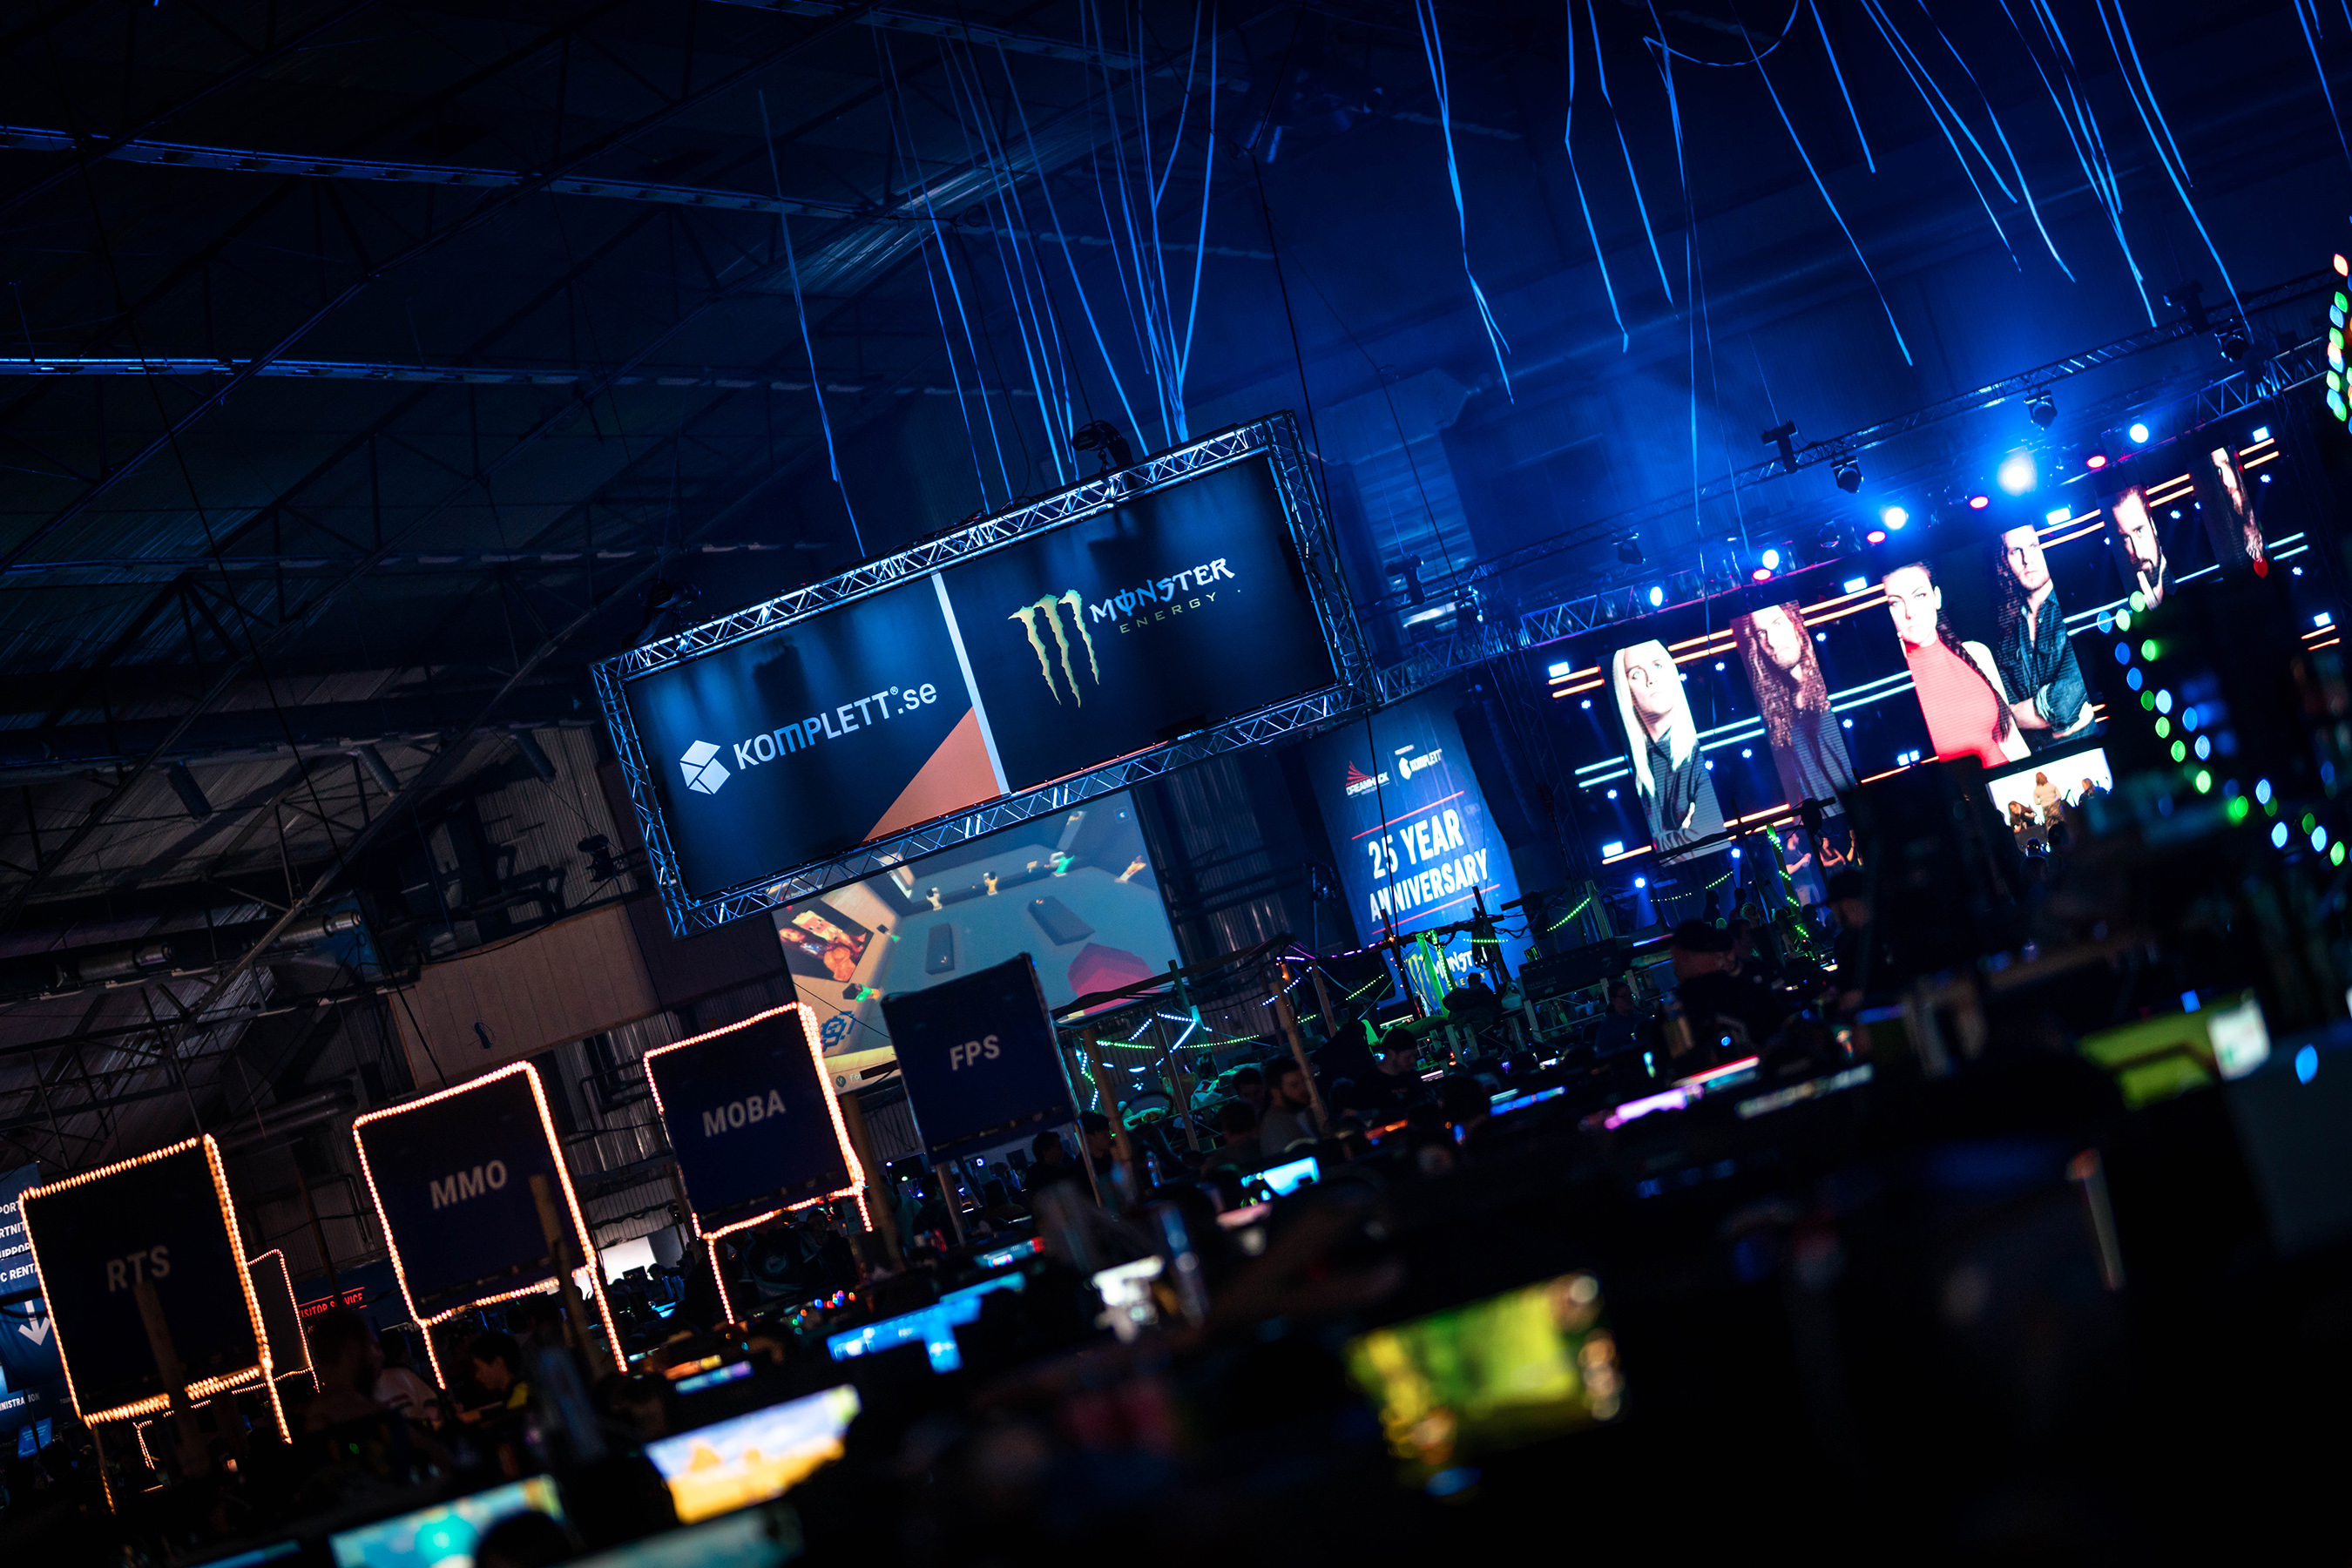 Monster Energy branding is featured above the LAN rows at a DreamHack festival where thousands of gamers play all weekend long.